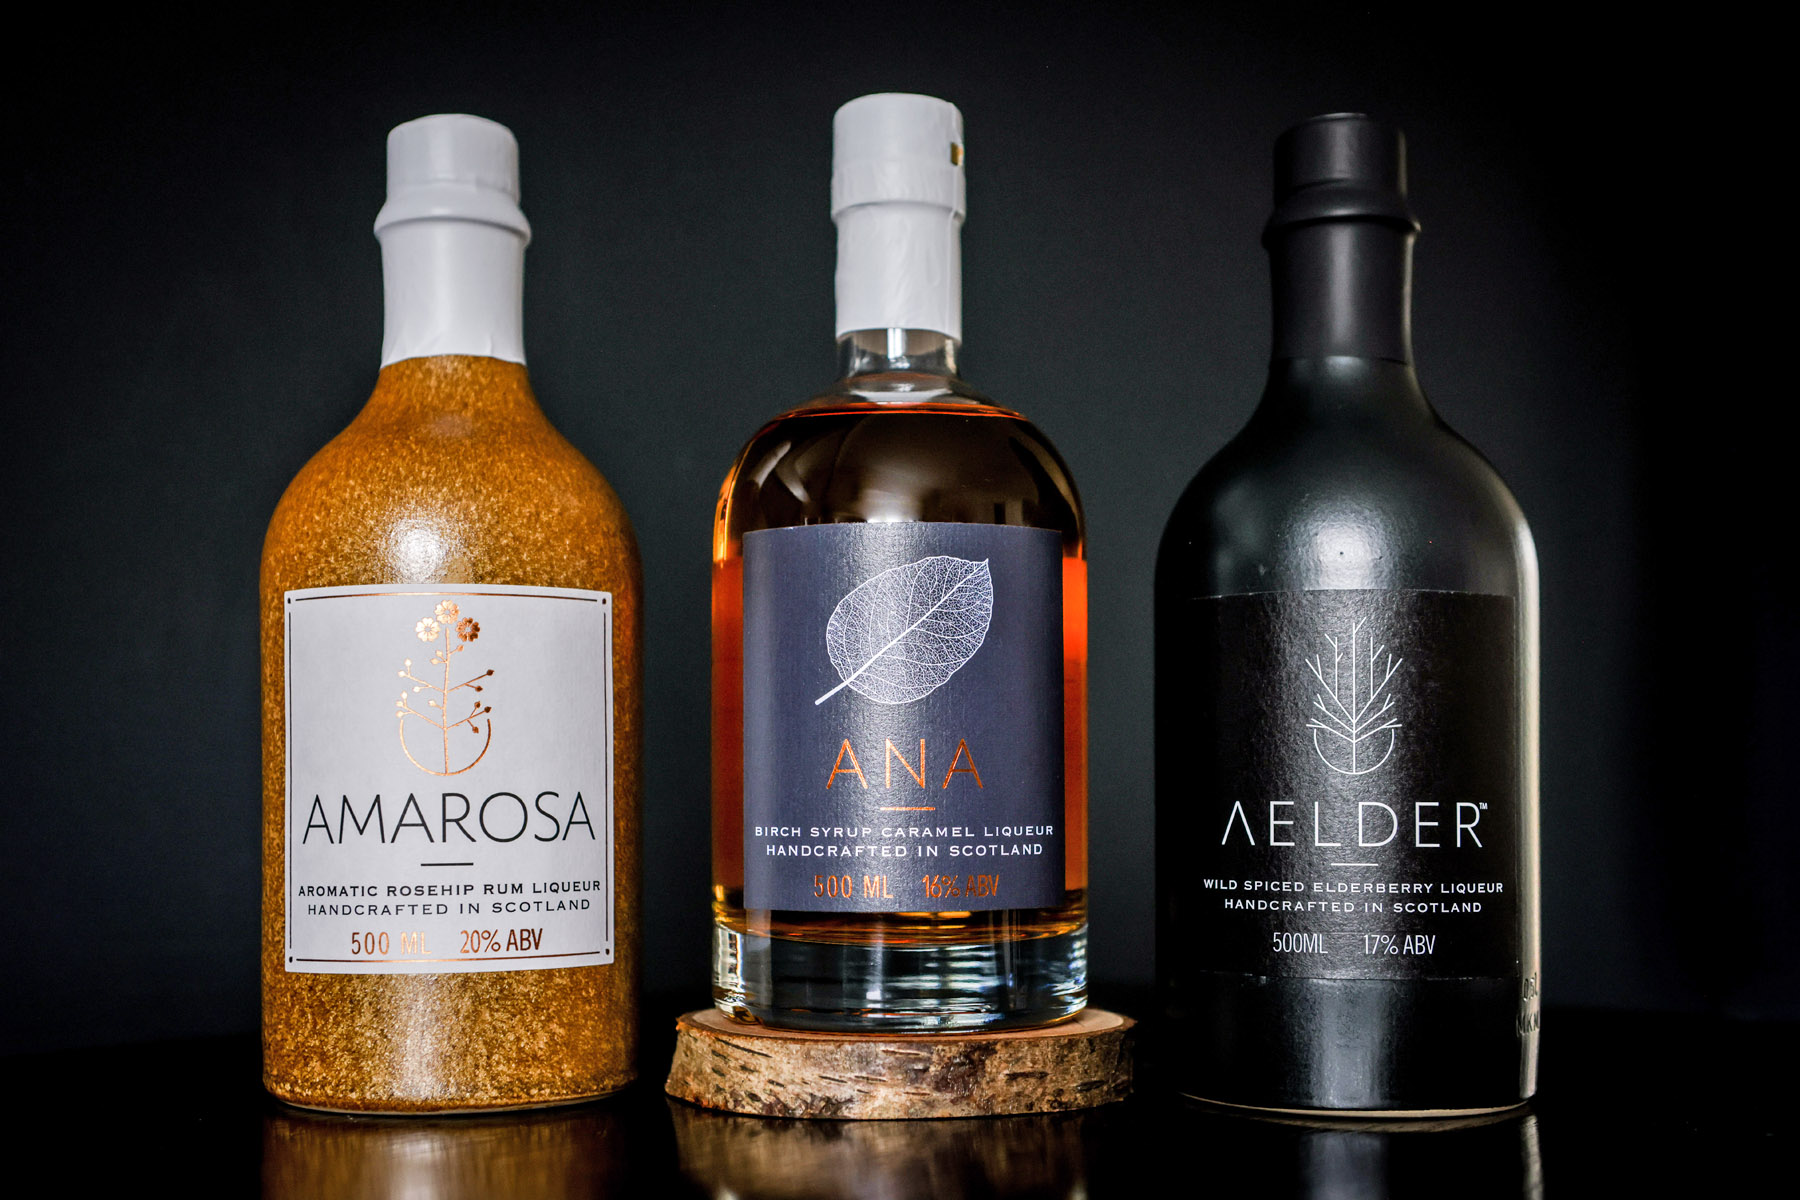 Amarosa, Ana and Aelder liqueurs from Buck and Birch